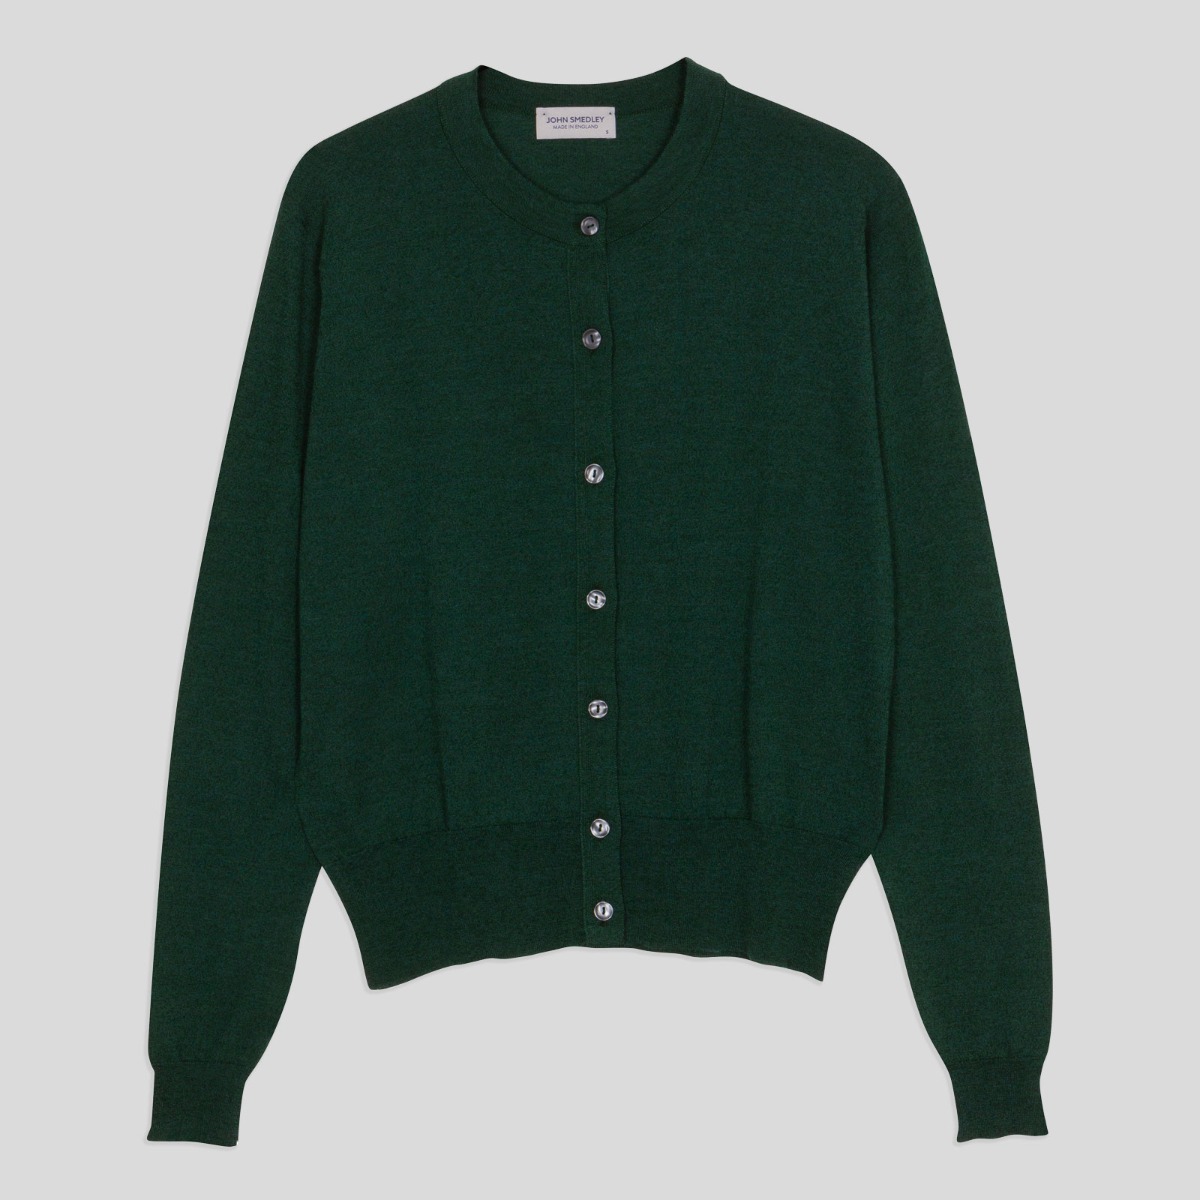 Ailey - Seasonal Collection - Bottle Green - L